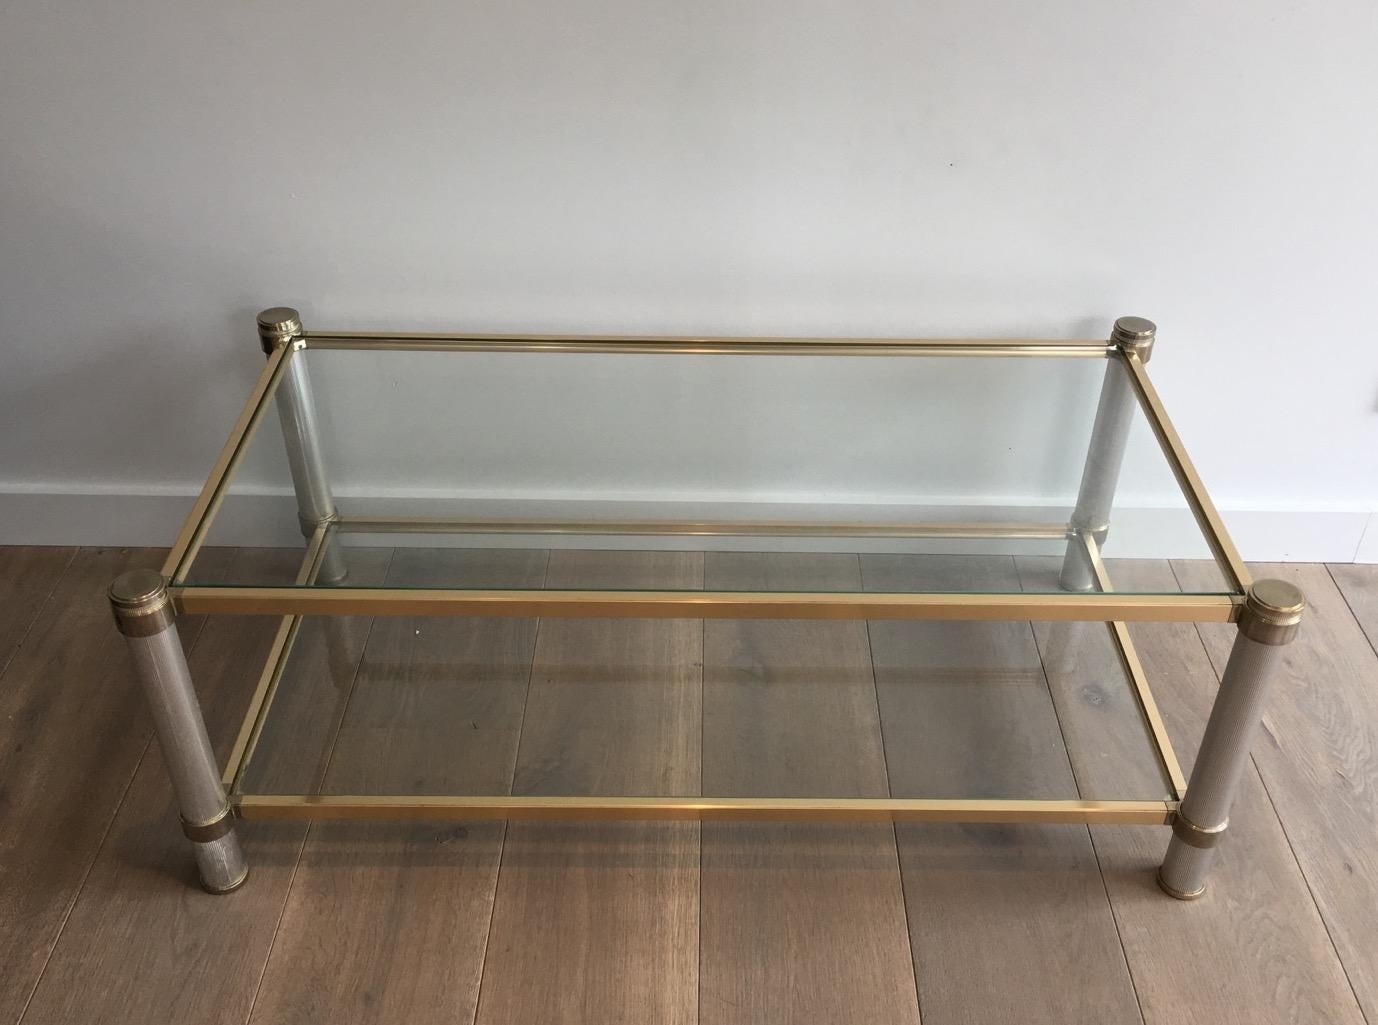  Gold Gilt and Silver Color Aluminium Coffee table with Fluted Legs by P. Vandel For Sale 11